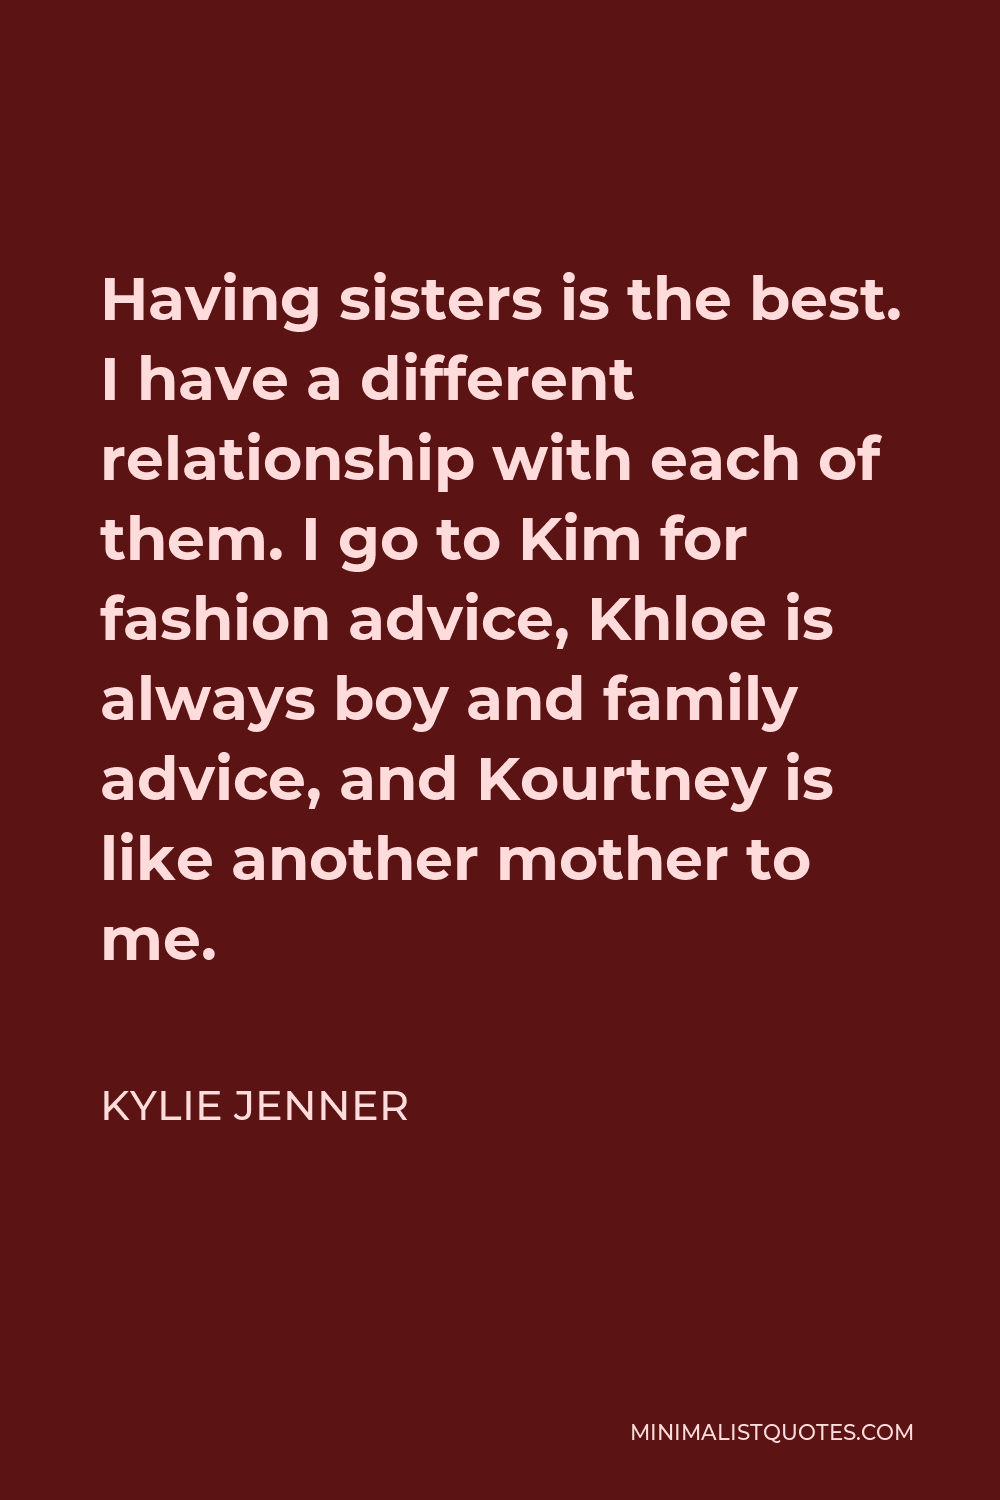 Kylie Jenner Quote - Having sisters is the best. I have a different relationship with each of them. I go to Kim for fashion advice, Khloe is always boy and family advice, and Kourtney is like another mother to me.